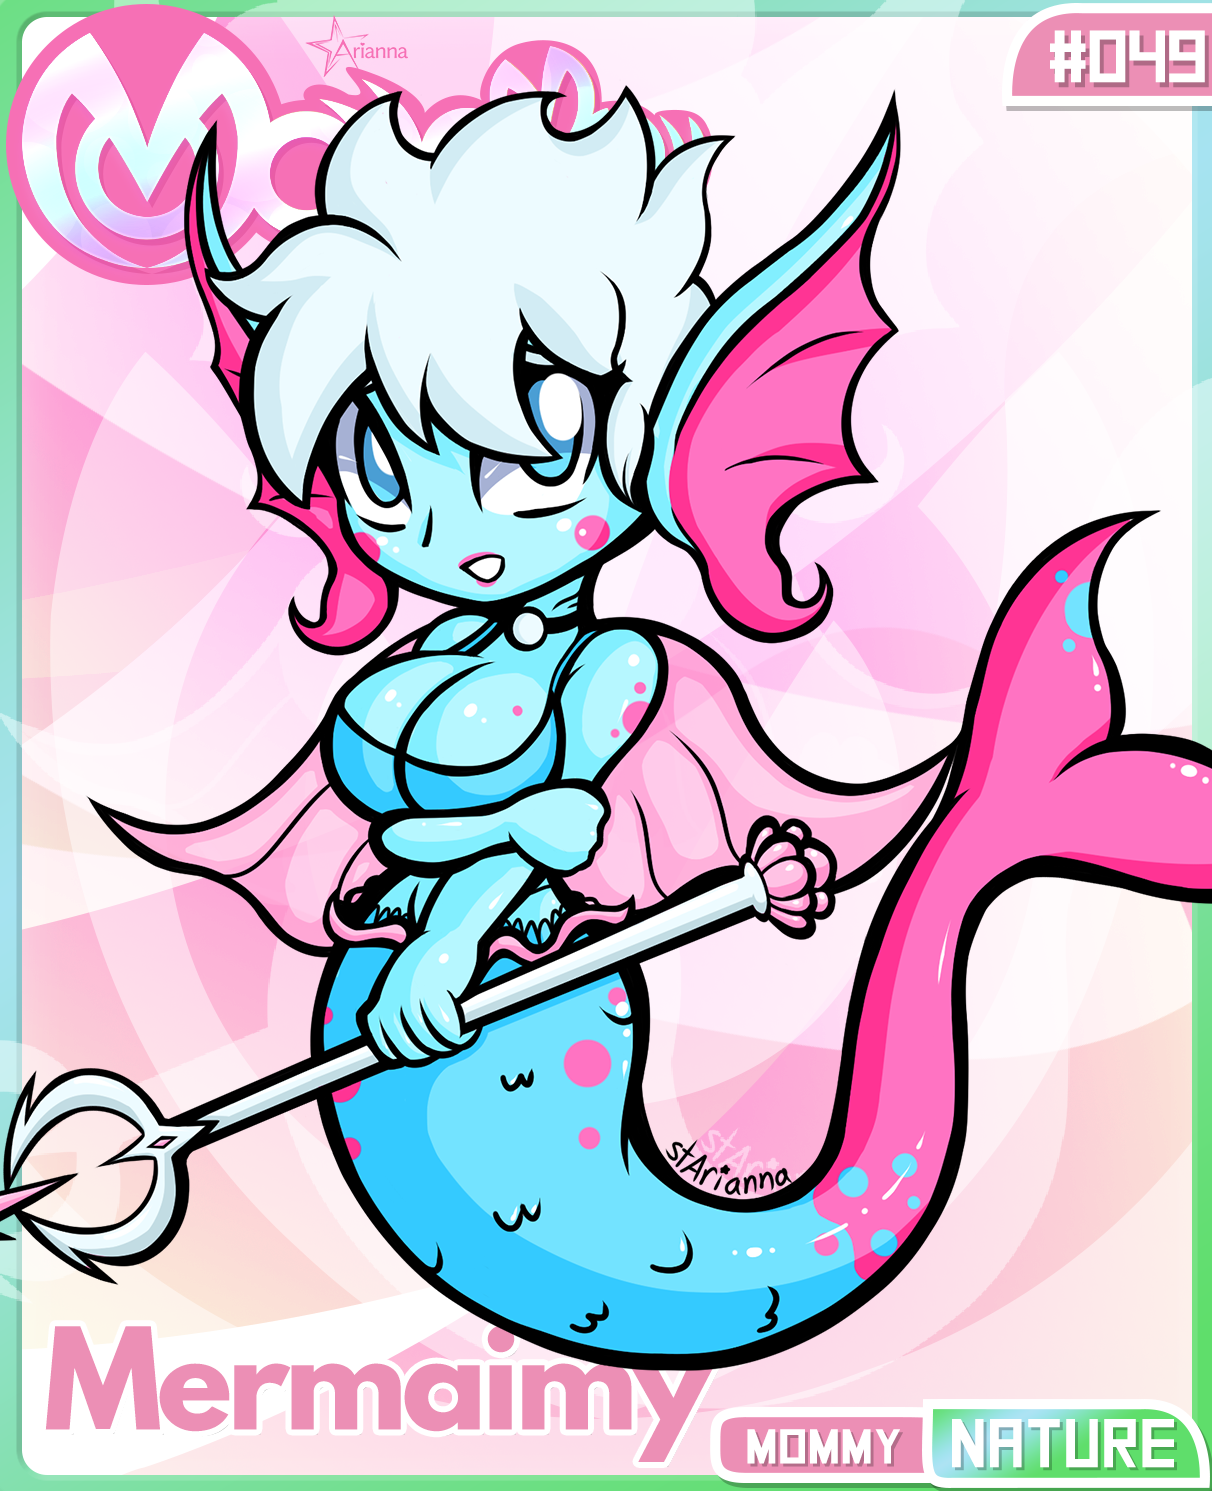 Mermaimy, Monommy #049, a mommy class nature-type